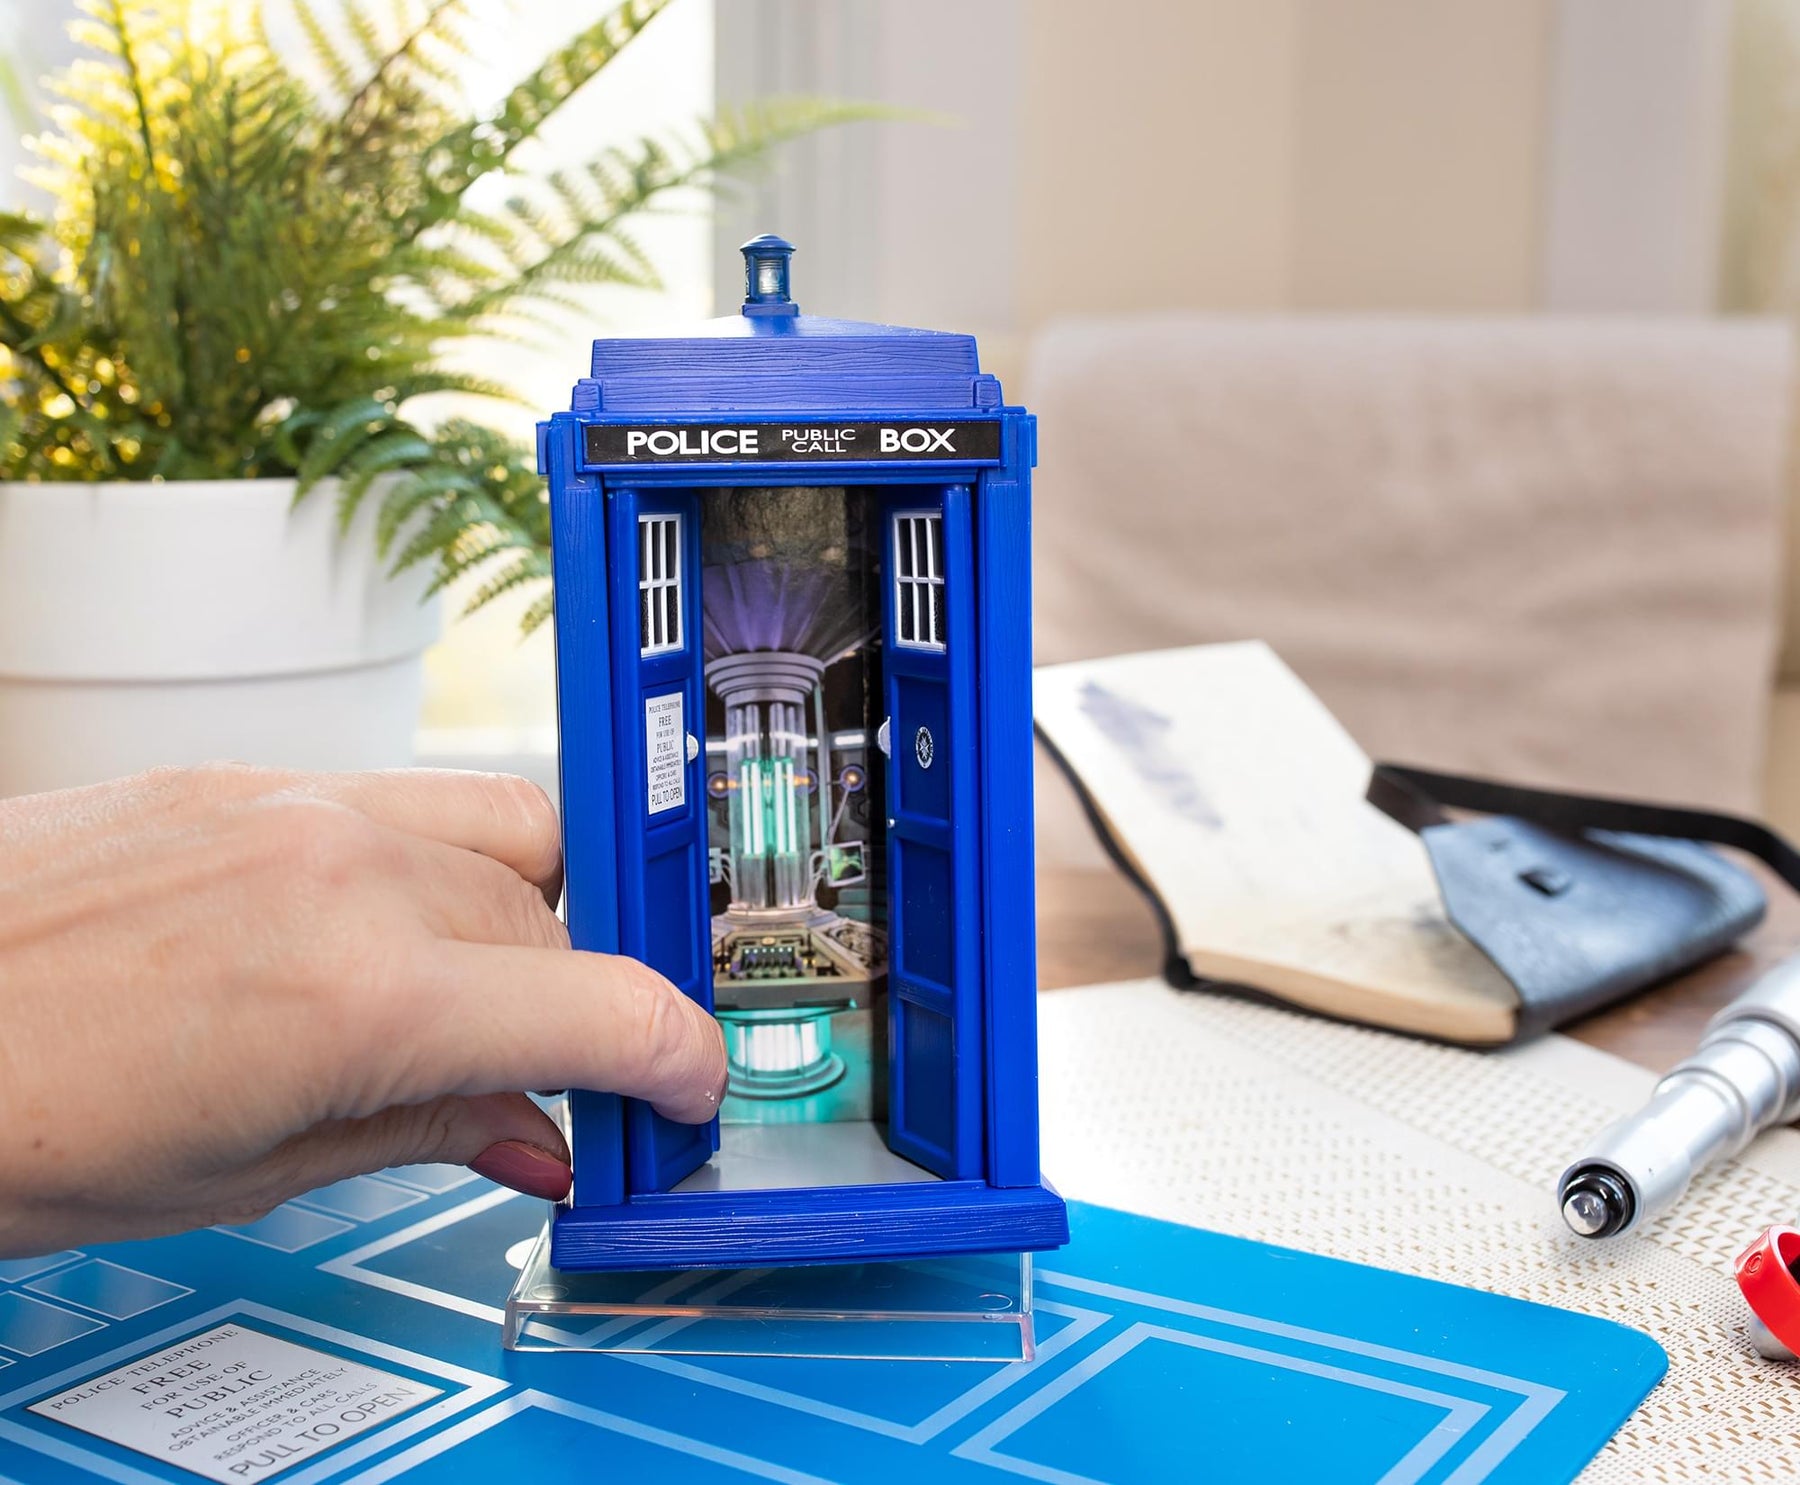 Doctor Who TARDIS Electronic Spin And Fly Vehicle